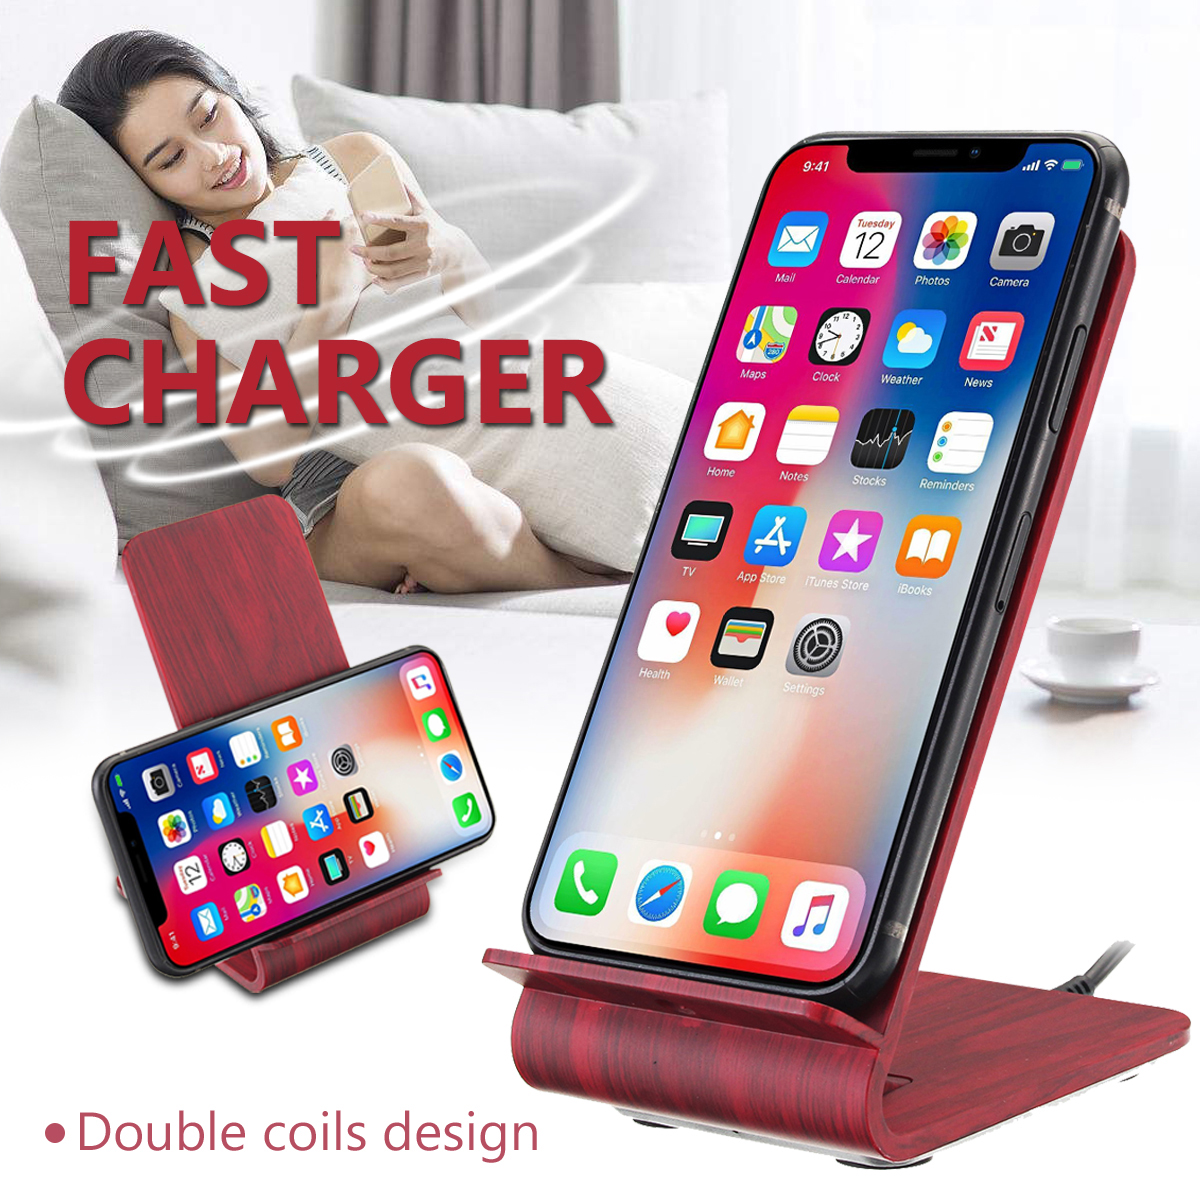 Bakeey-Qi-Wooden-Wireless-Charger-Desktop-Holder-For-iPhone-X-8-8Plus-Samsung-S8-S7-Edge-Note-8-1221453-1